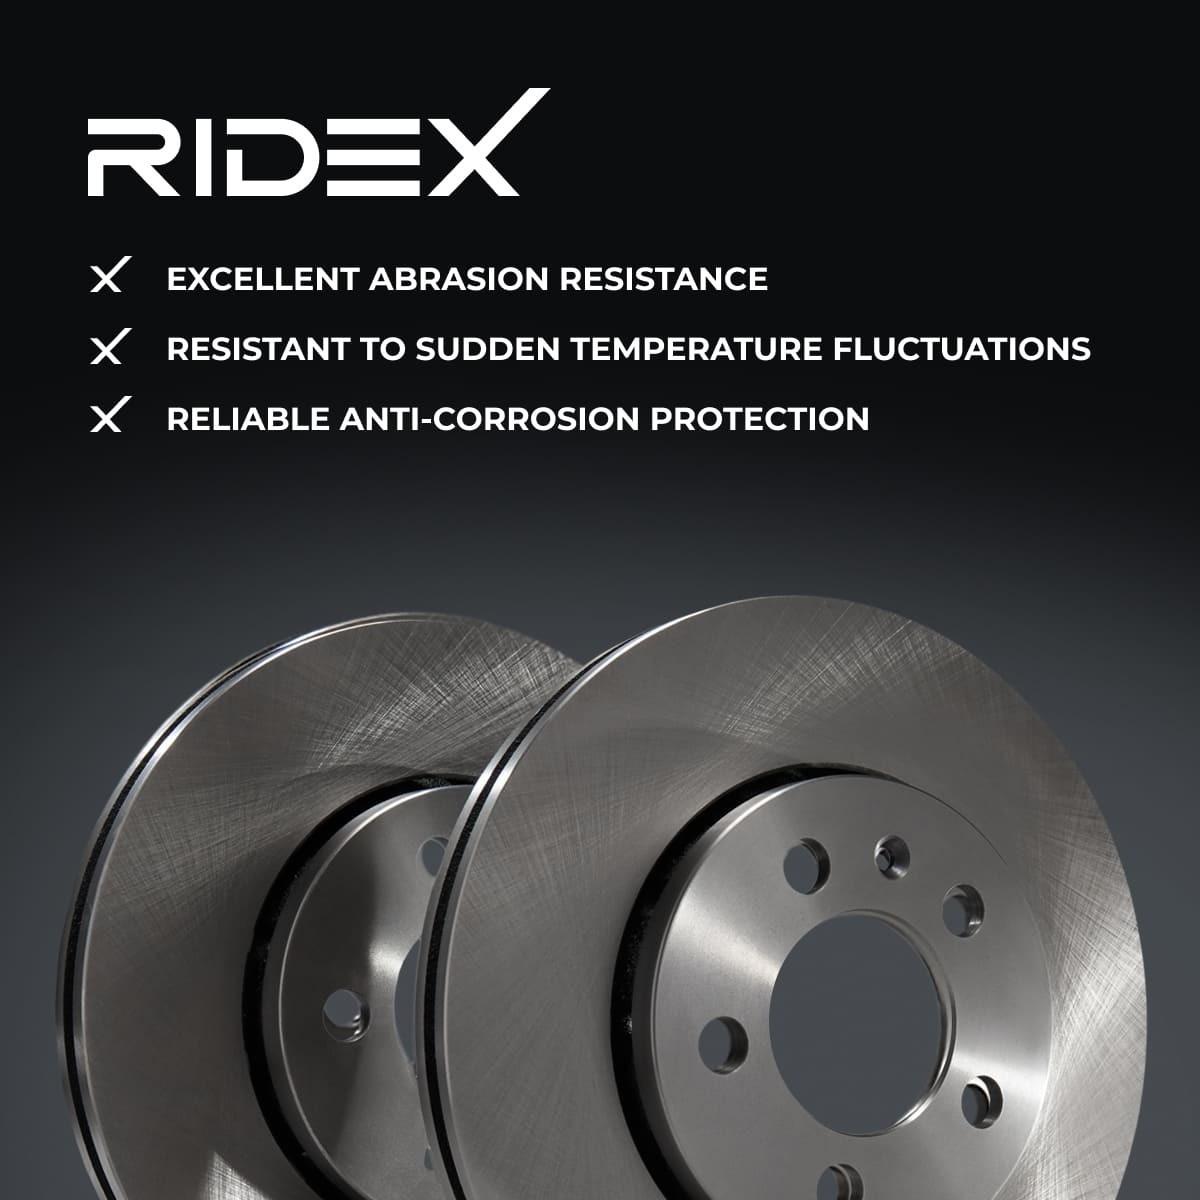 82B0027 Brake discs 82B0027 RIDEX Front Axle, 280x22,0mm, 5x112,0, Vented, Uncoated